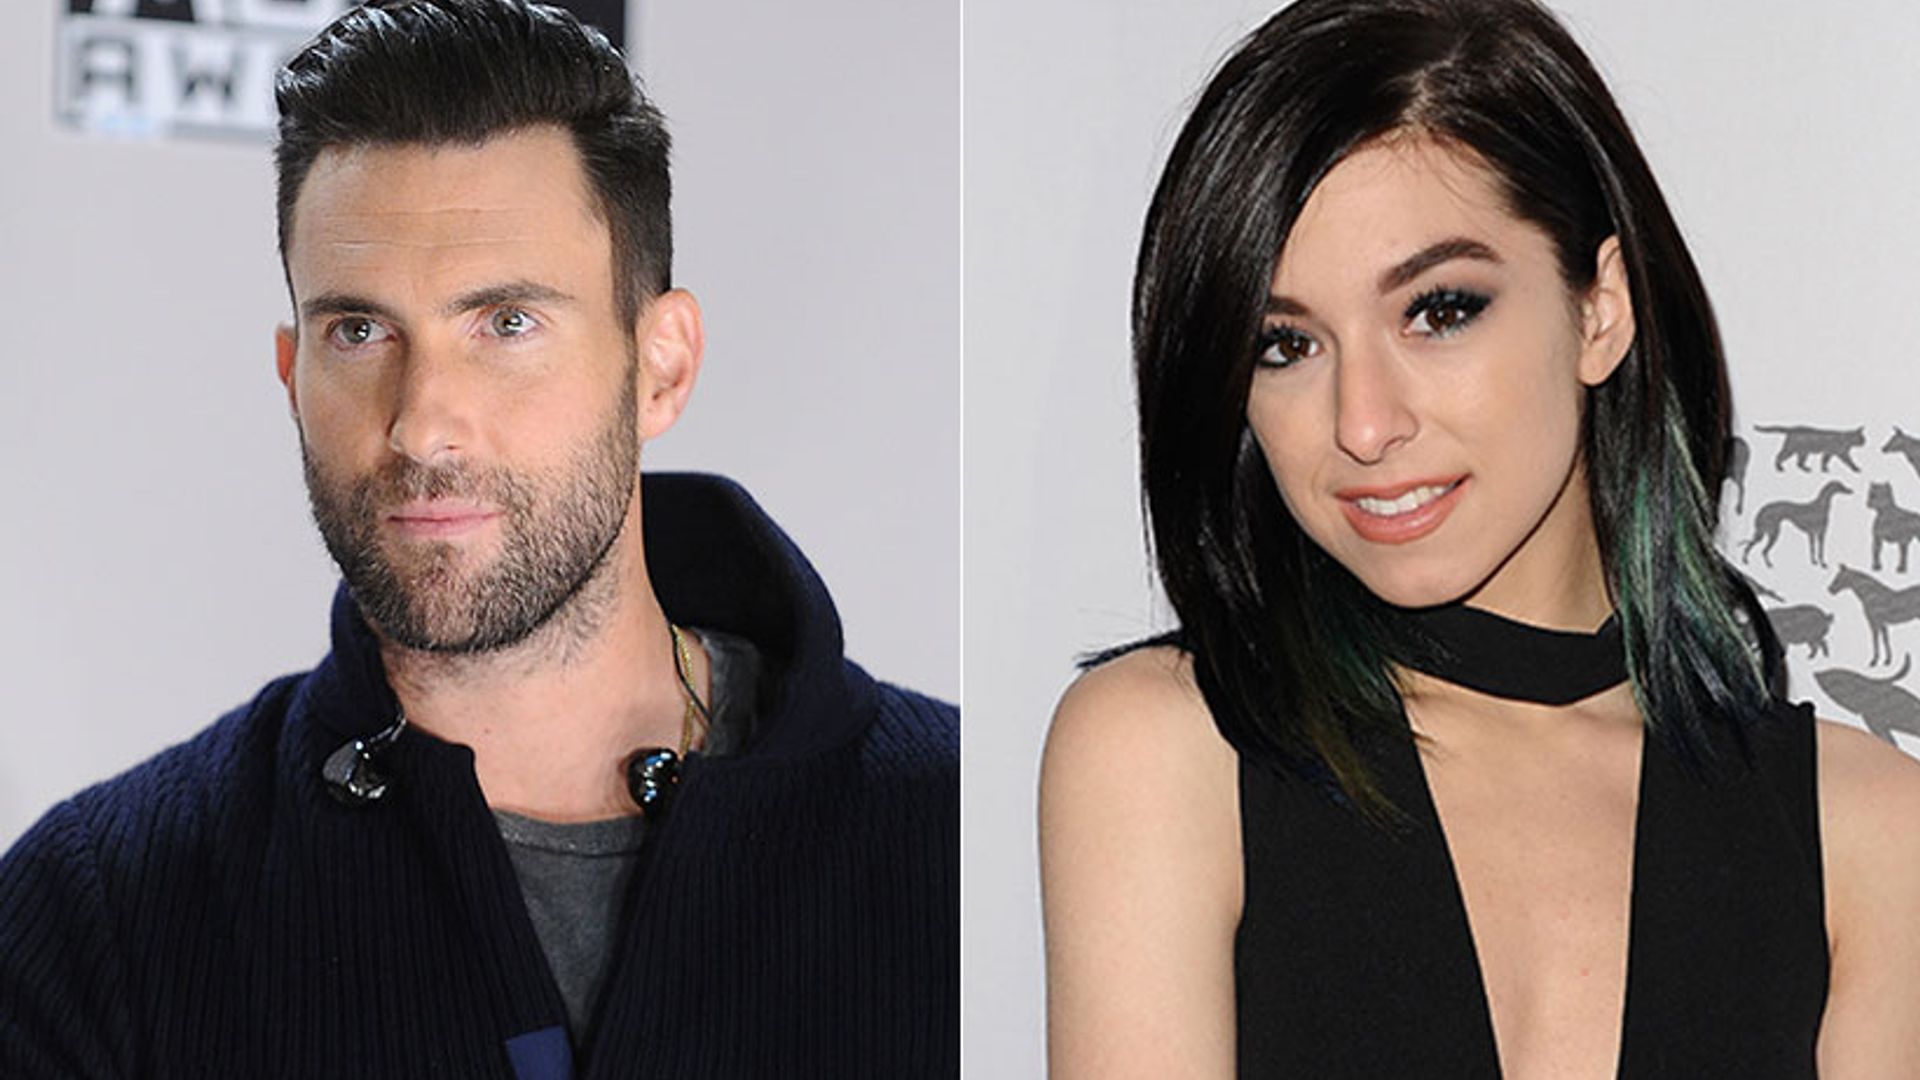 Adam Levine pays moving tribute to Christina Grimmie on The Voice: 'I miss her'